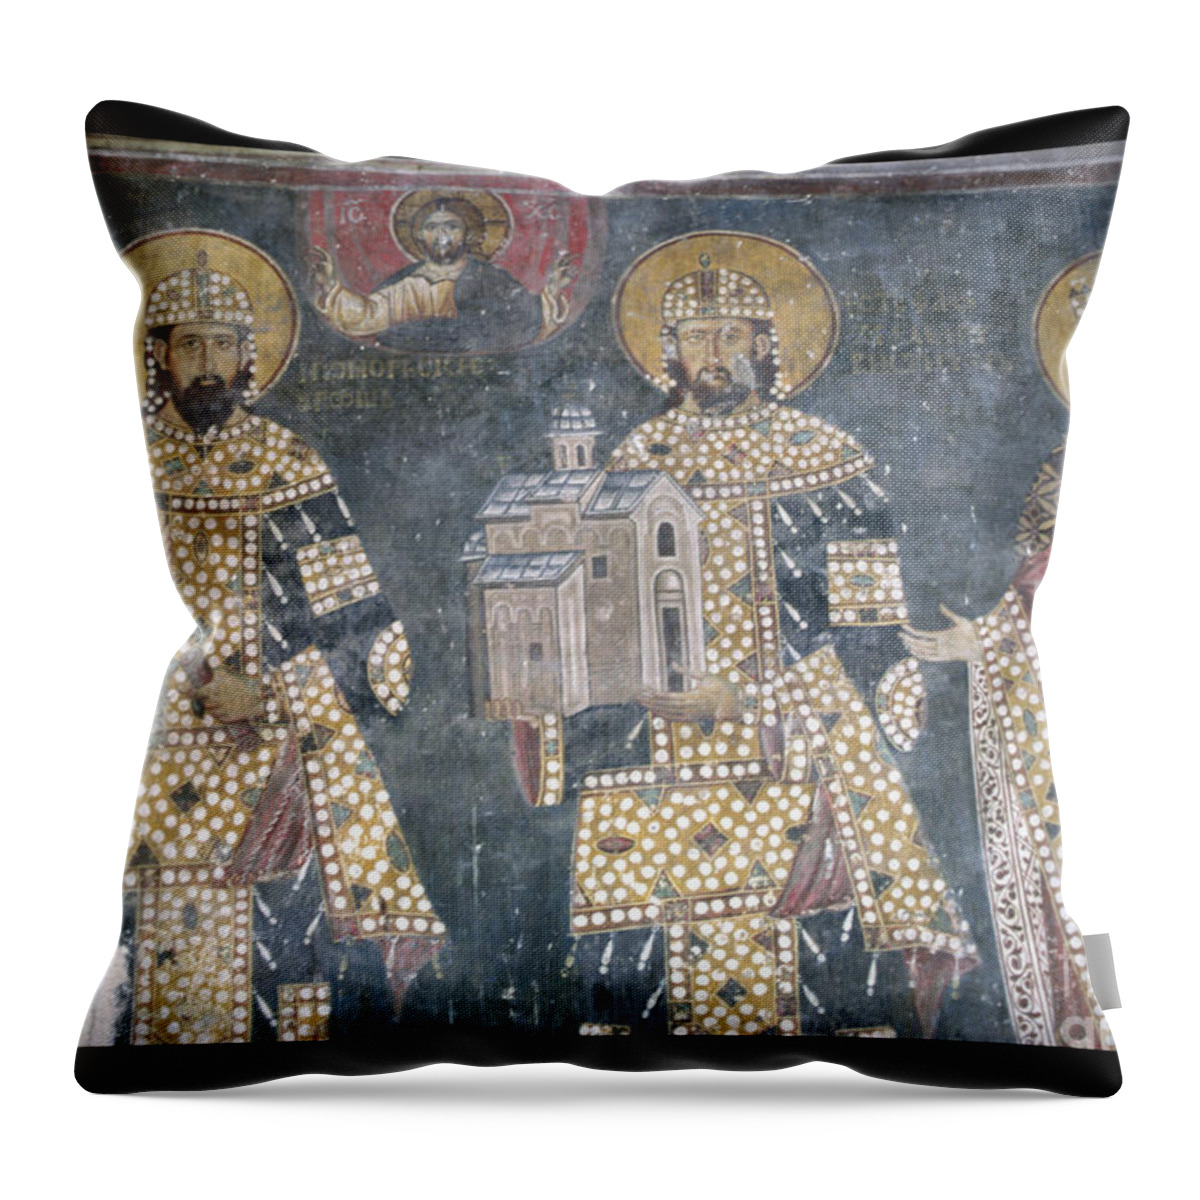 Byzantine Influence Throw Pillow featuring the painting Stefan Milutin, Stefan Dragutin And Katelina, Late 13th Century by Serbian School